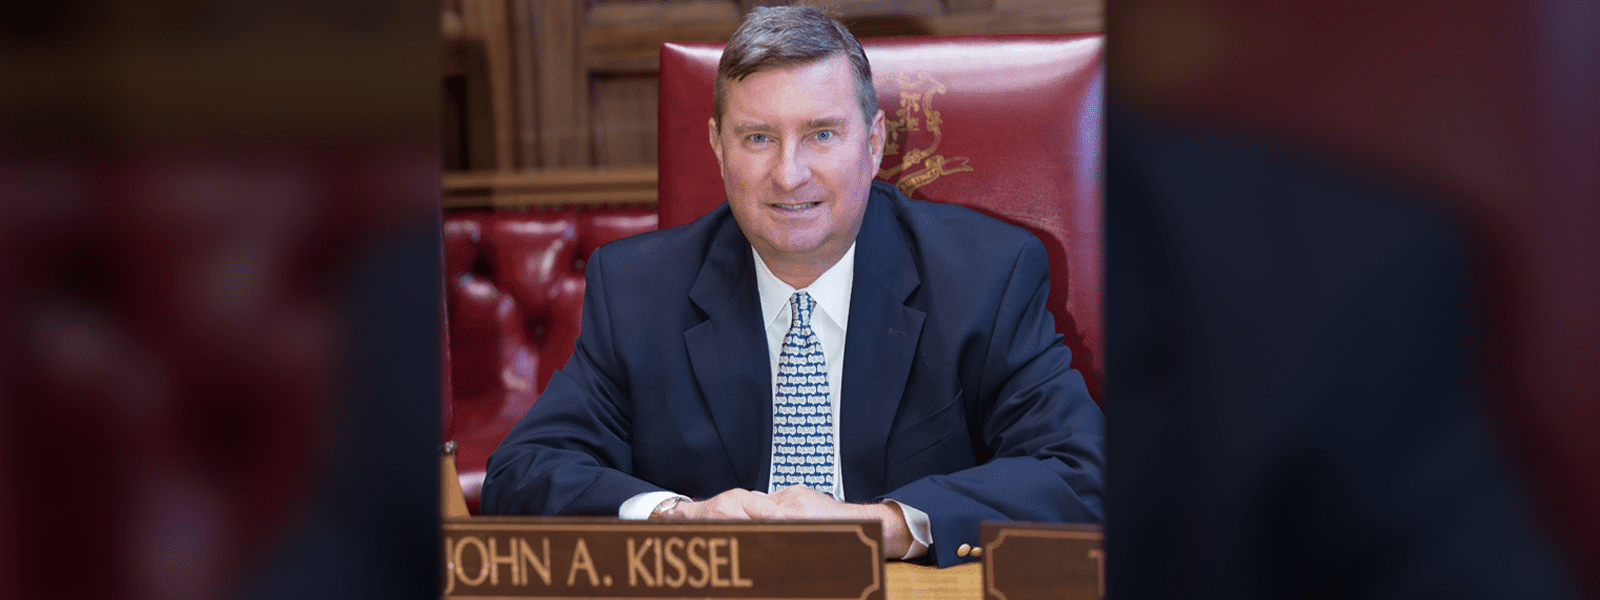 Sen. Kissel: CT legislature has been seated at the ‘Baby Table’ “for far too long”